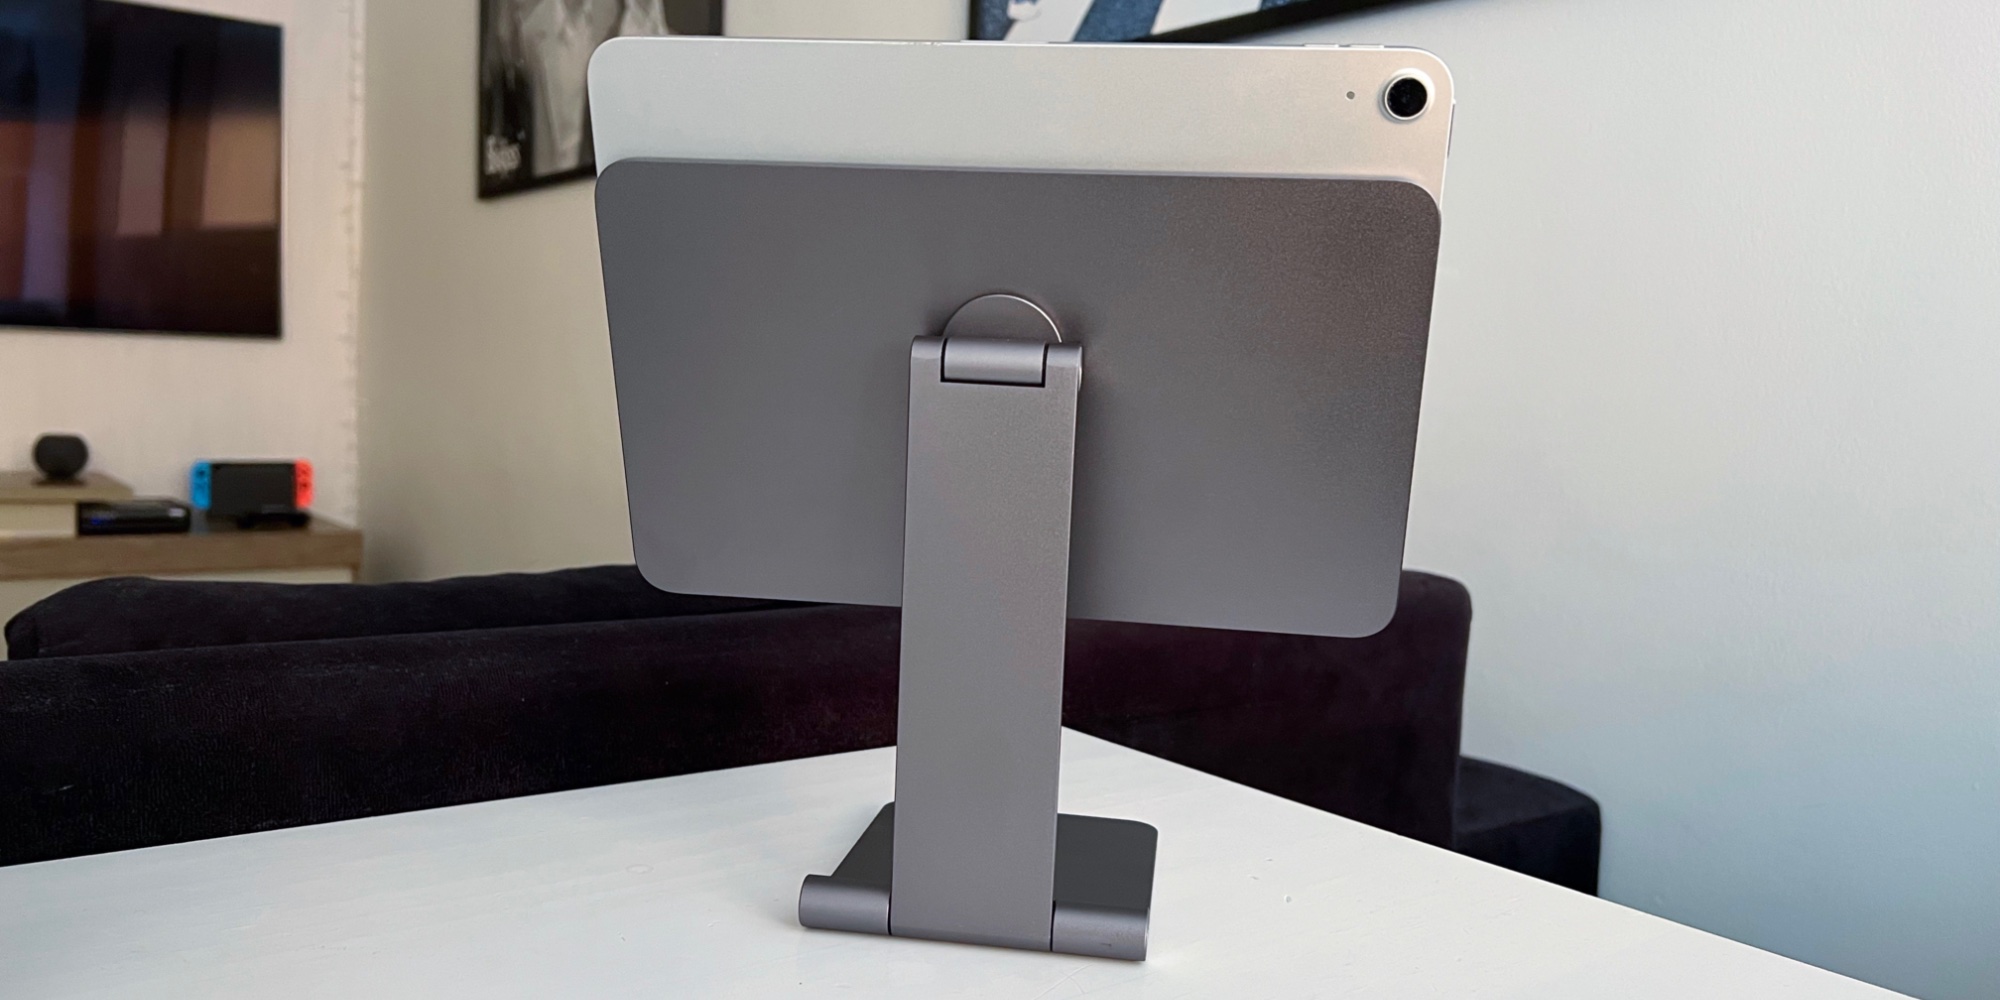 Review: Lululook Foldable Magnetic iPad Air/Pro Stand - 9to5Mac